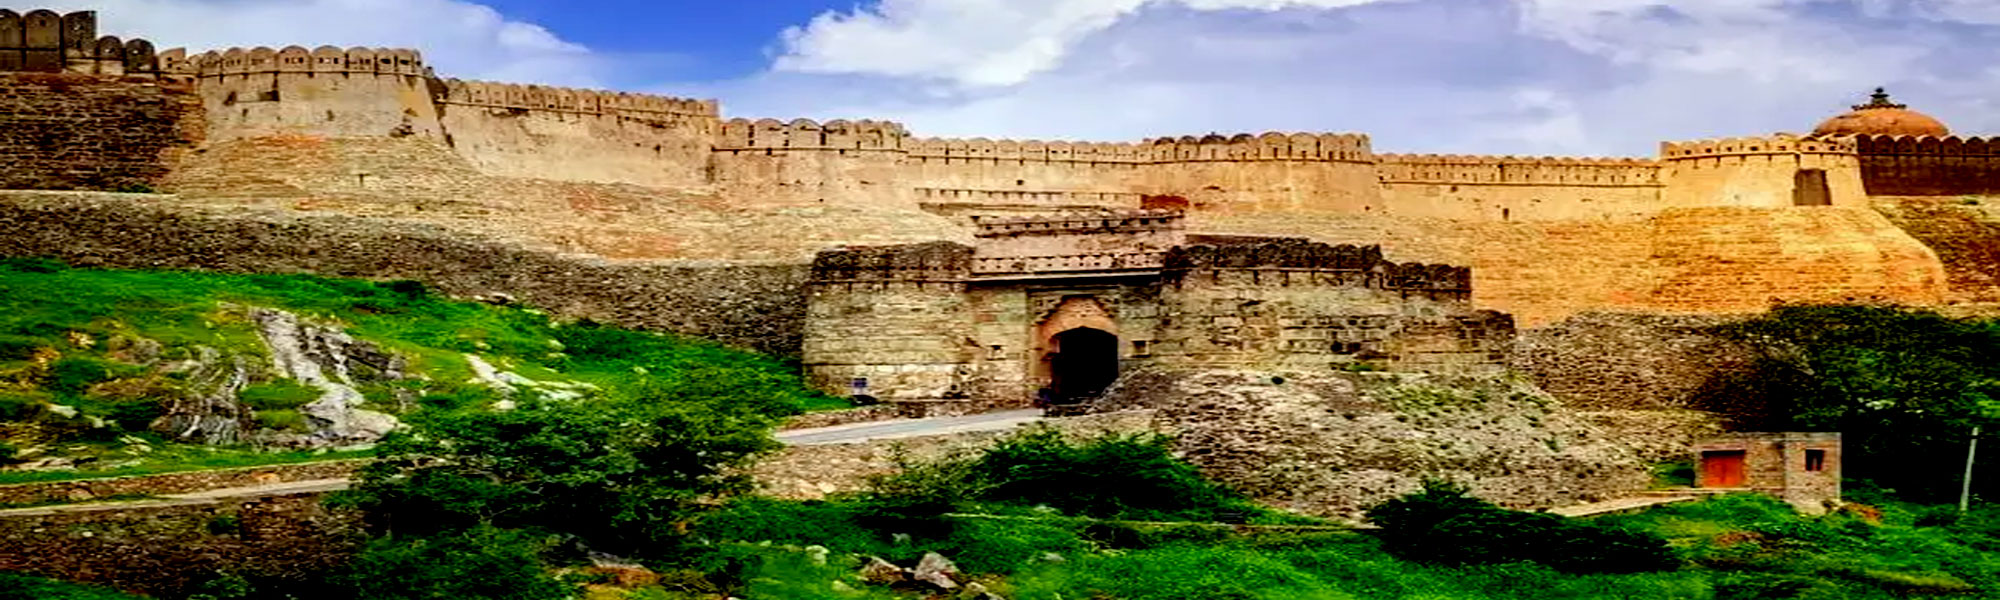 Himpushp Tours in India with Fort and Palaces Tours in India